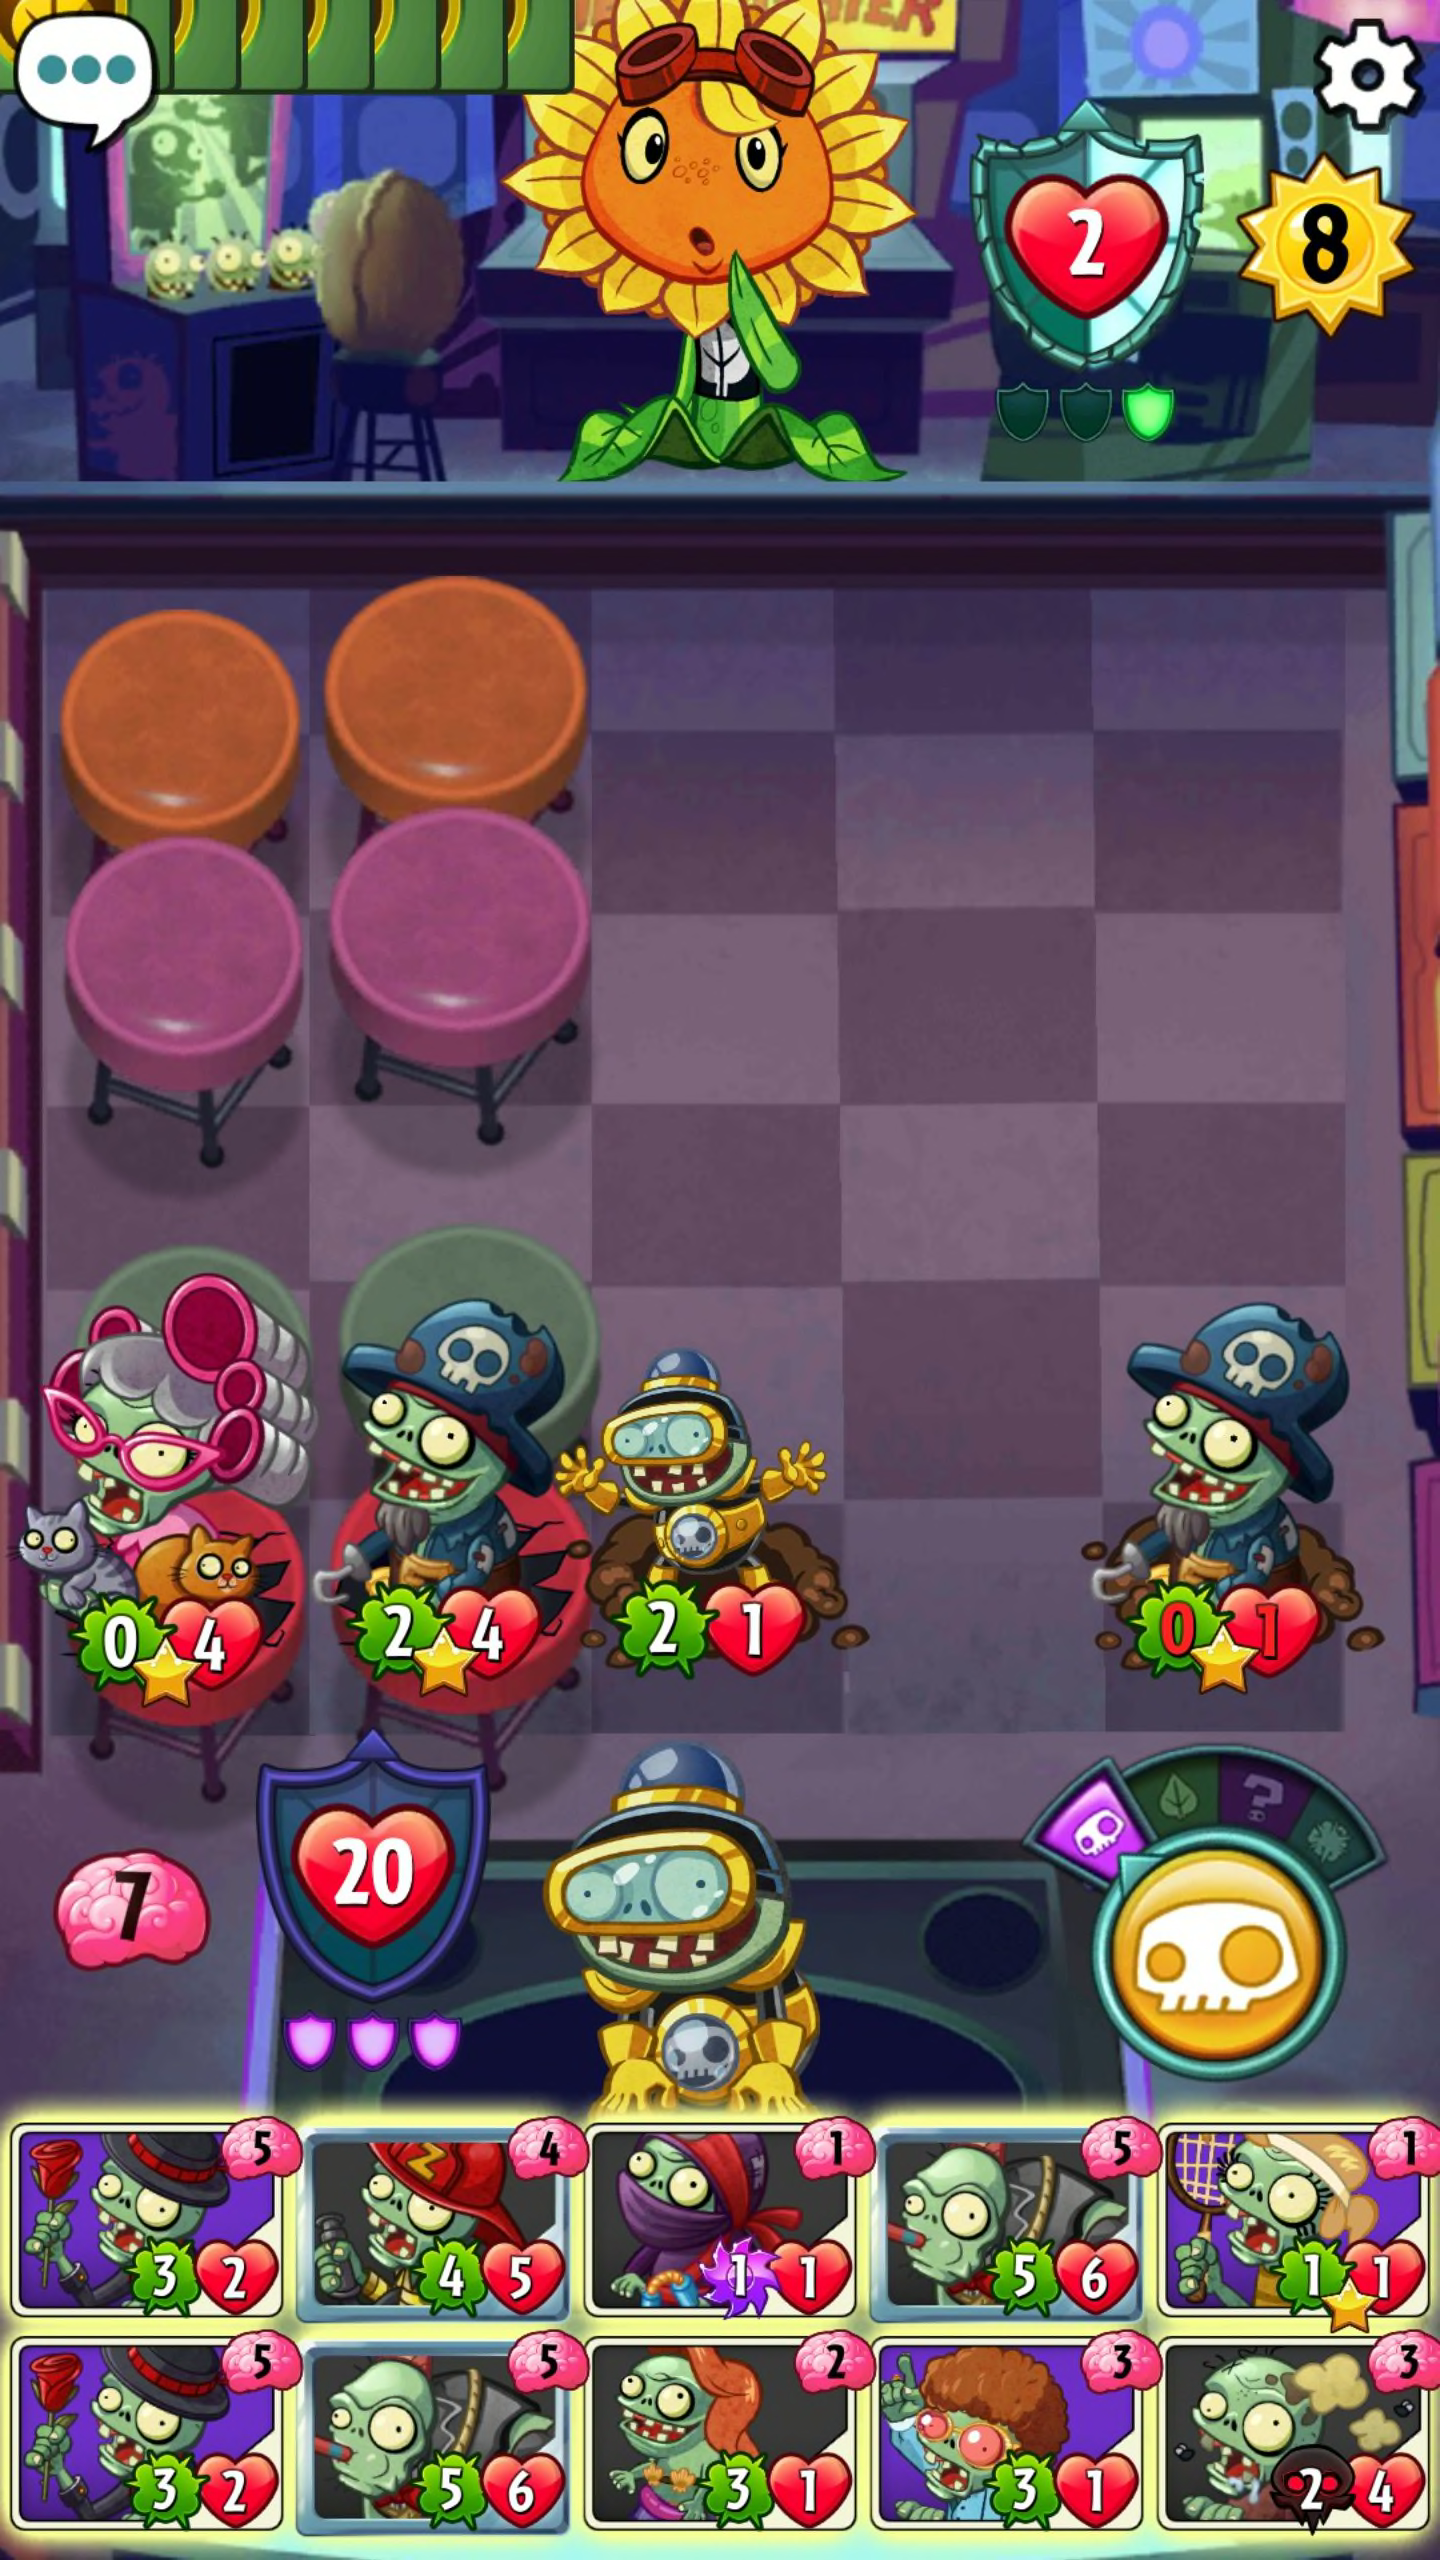 Plants vs. Zombies Heroes Guide: How to build your first deck